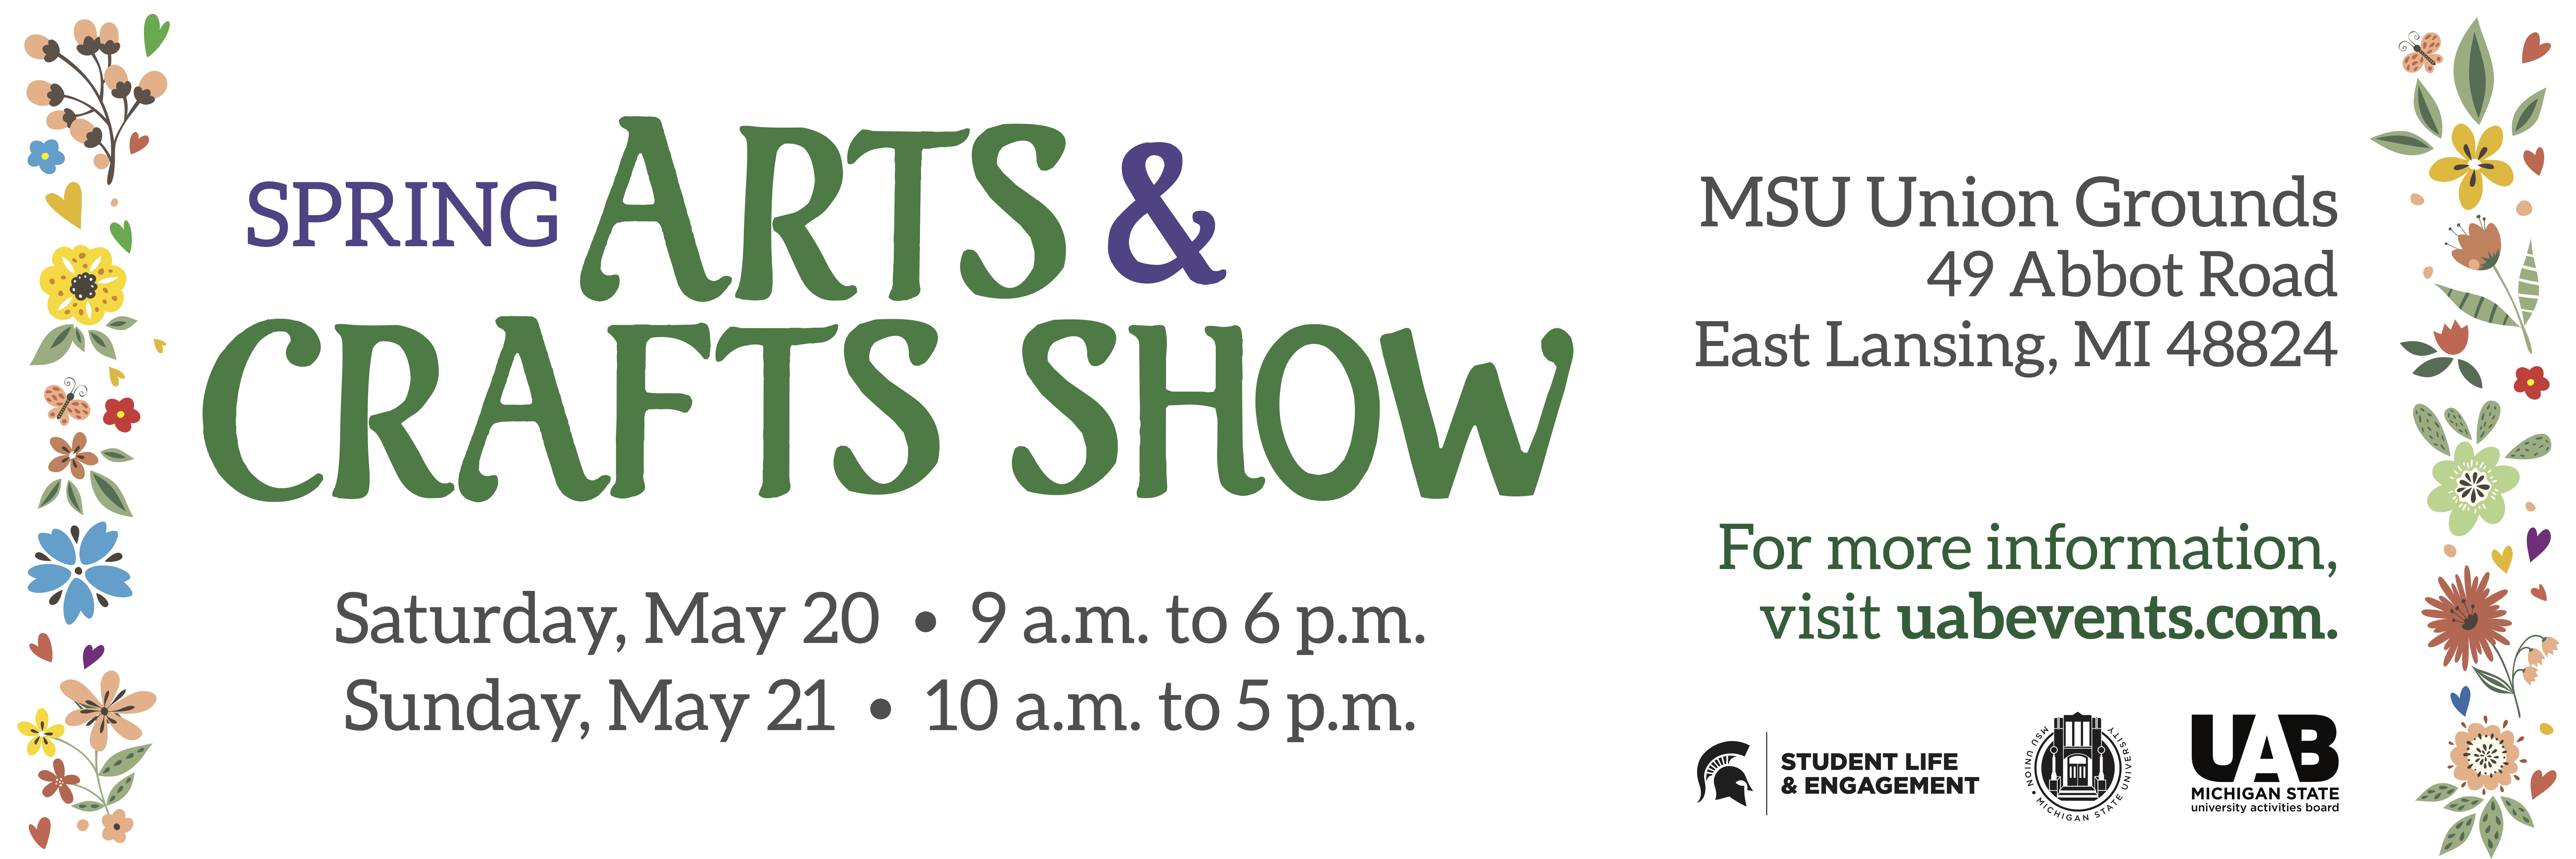 Annual Arts & Crafts Show UAB Events